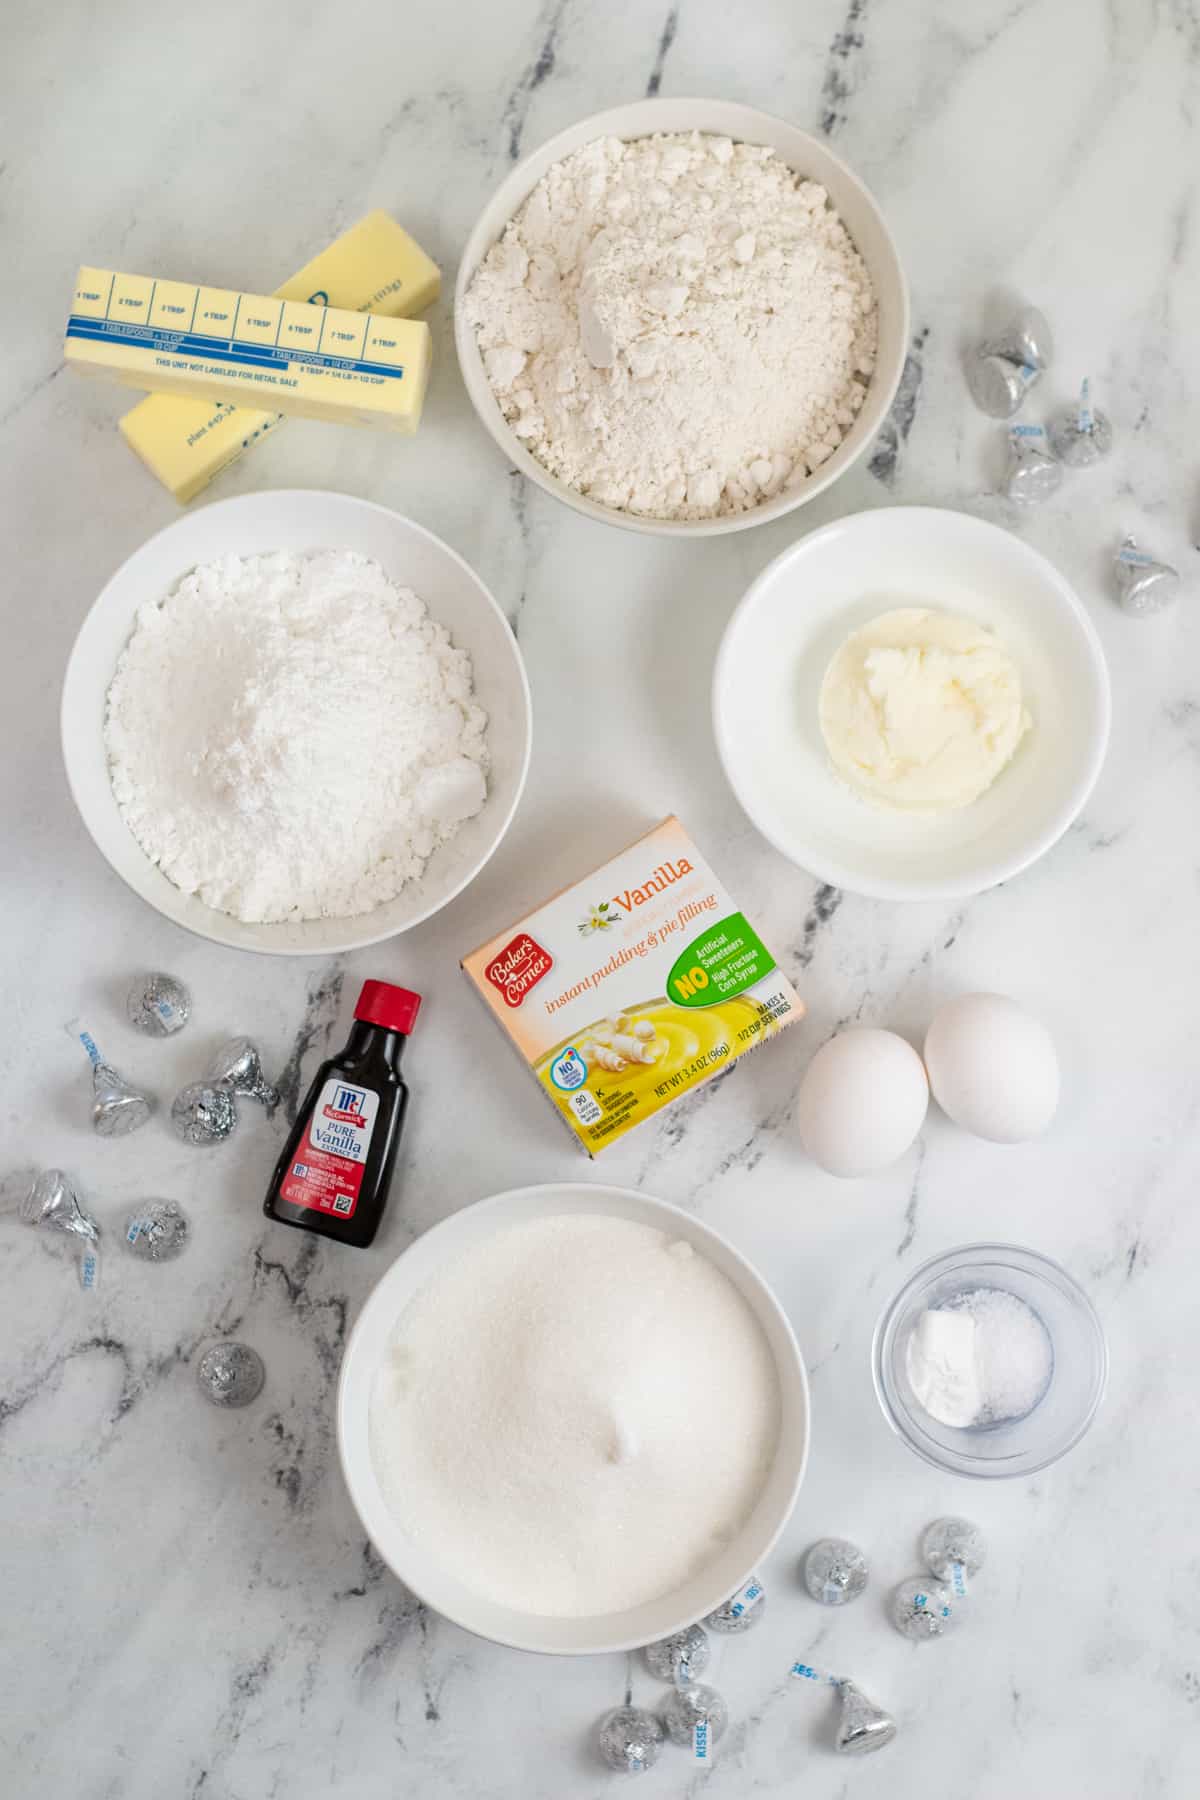 Ingredients on countertop: two sticks of butter, flour, granulated sugar, shortening, vanilla extract, box of vanilla instant pudding, 2 eggs, salt, baking powder, and milk.